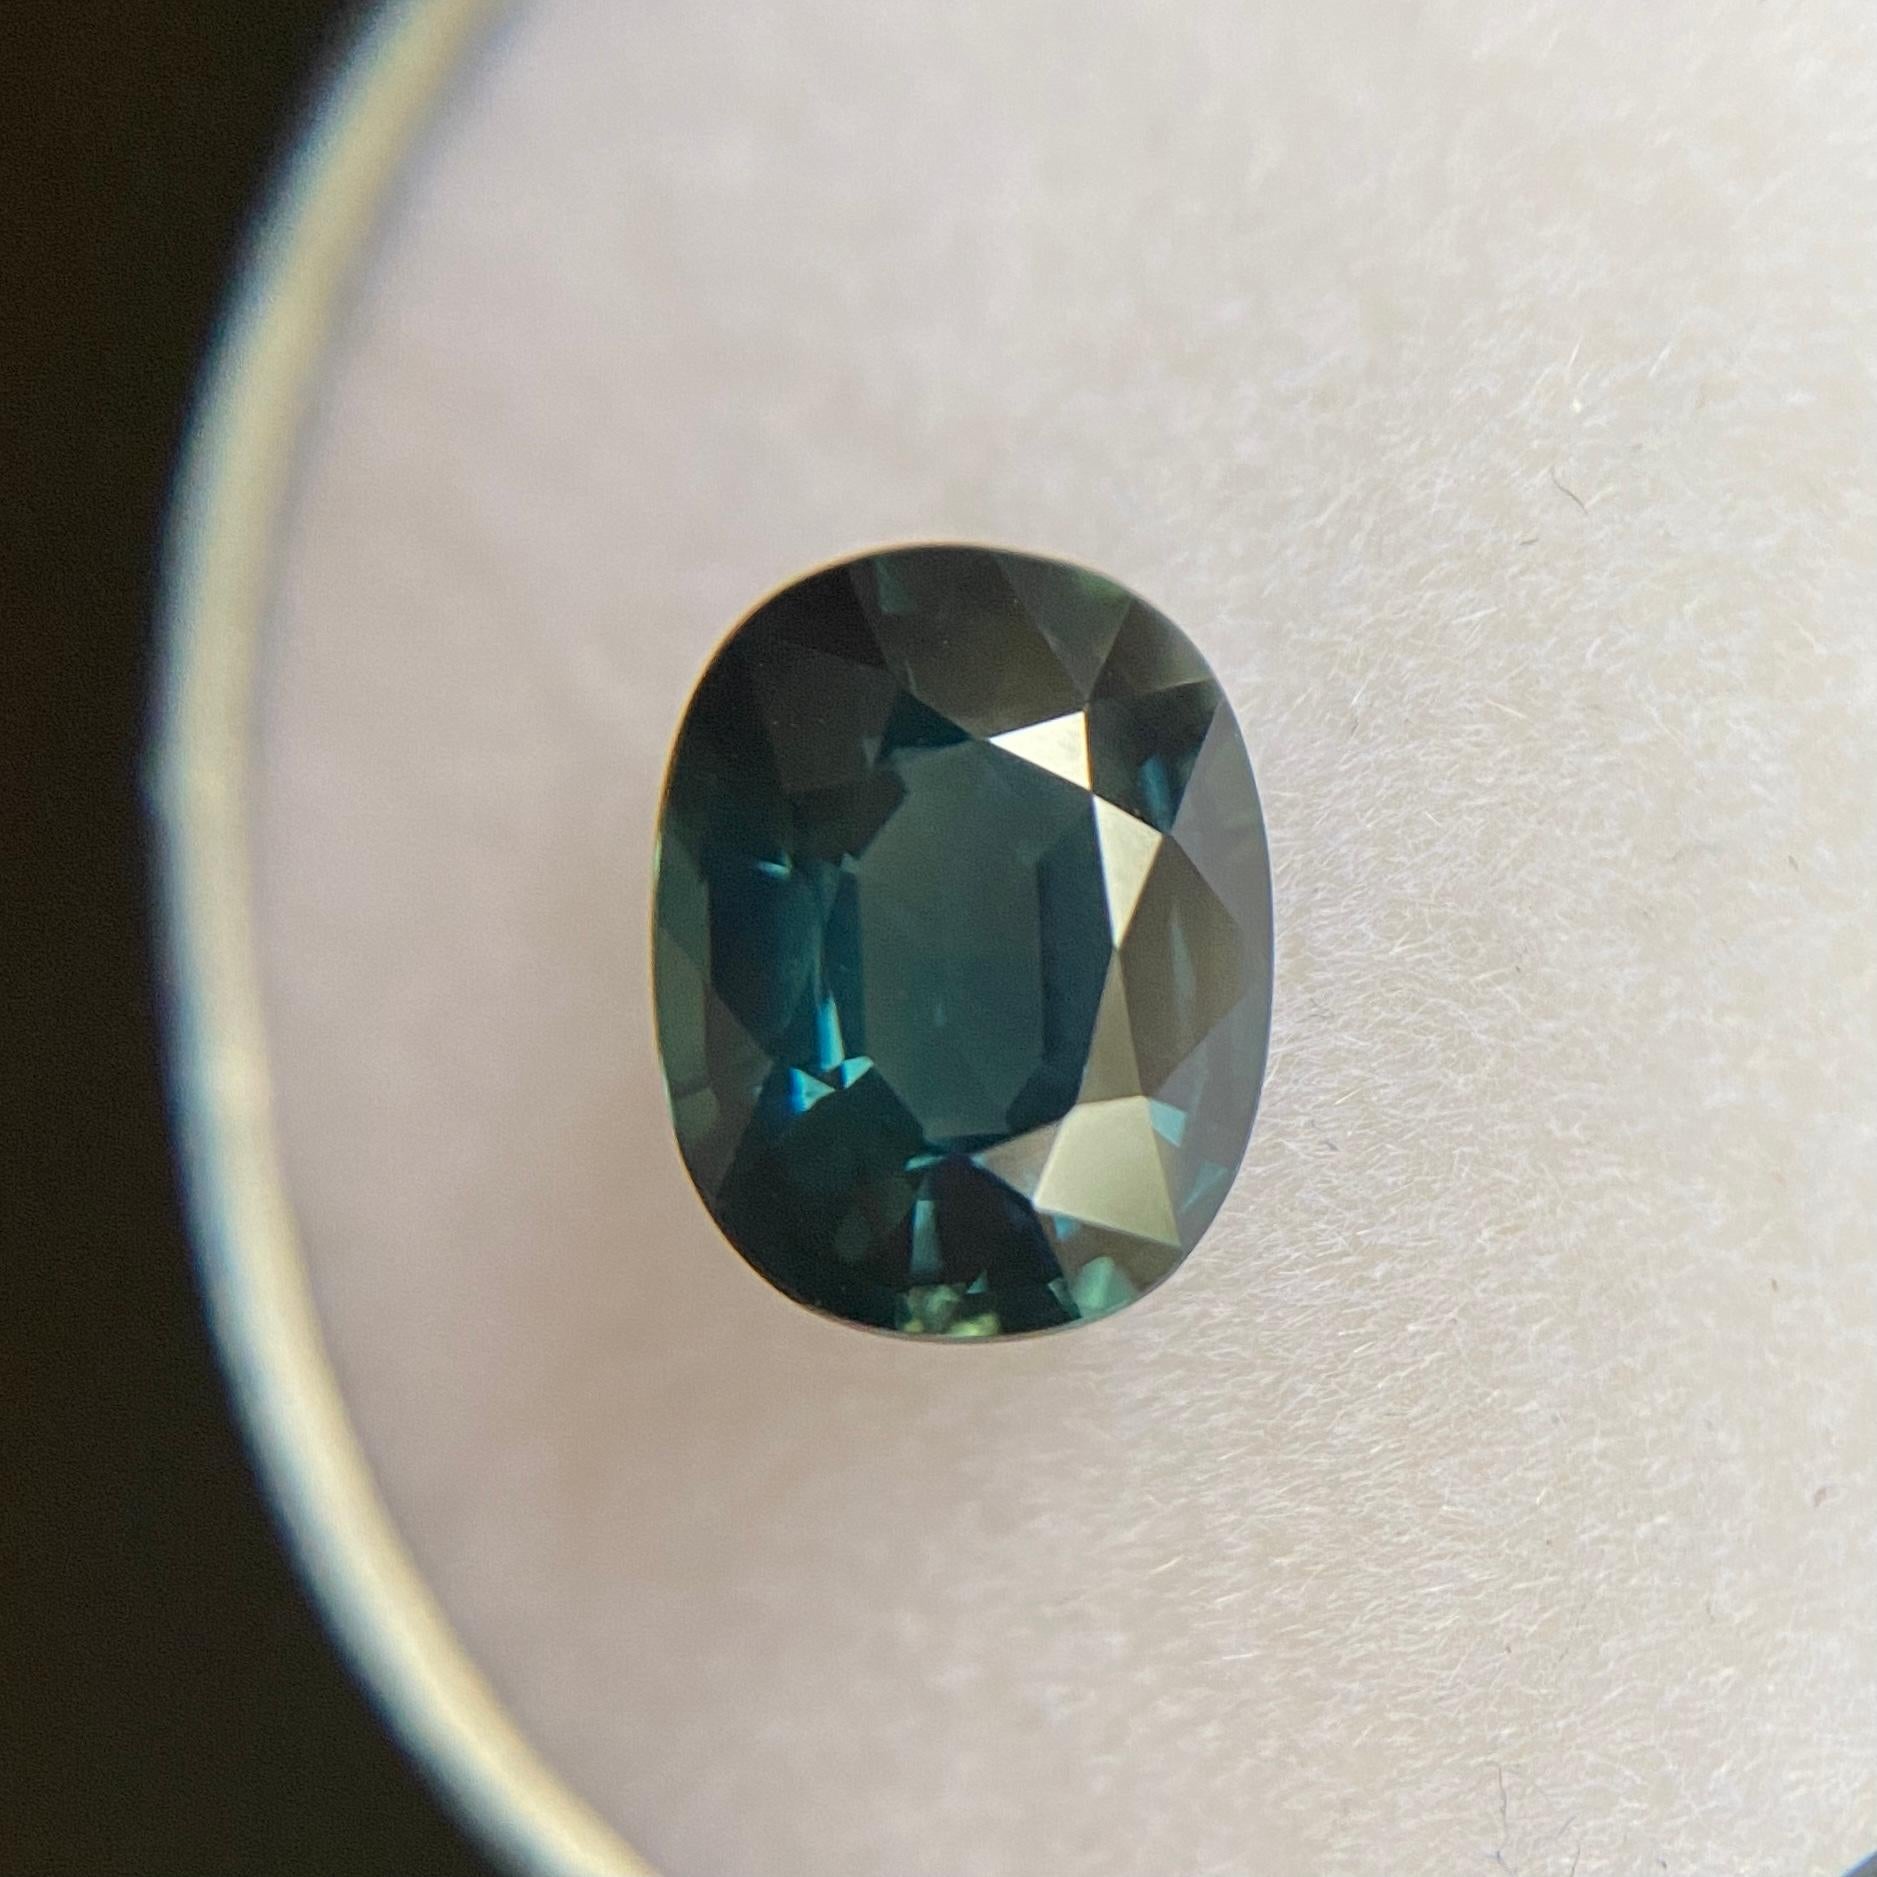 Fine Deep Blue Sapphire Gemstone.

2.15 Carat with a beautiful deep blue colour and very good clarity, a clean stone.

Also has an excellent oval cut and polish to show great shine and colour, would look lovely in jewellery. Measures